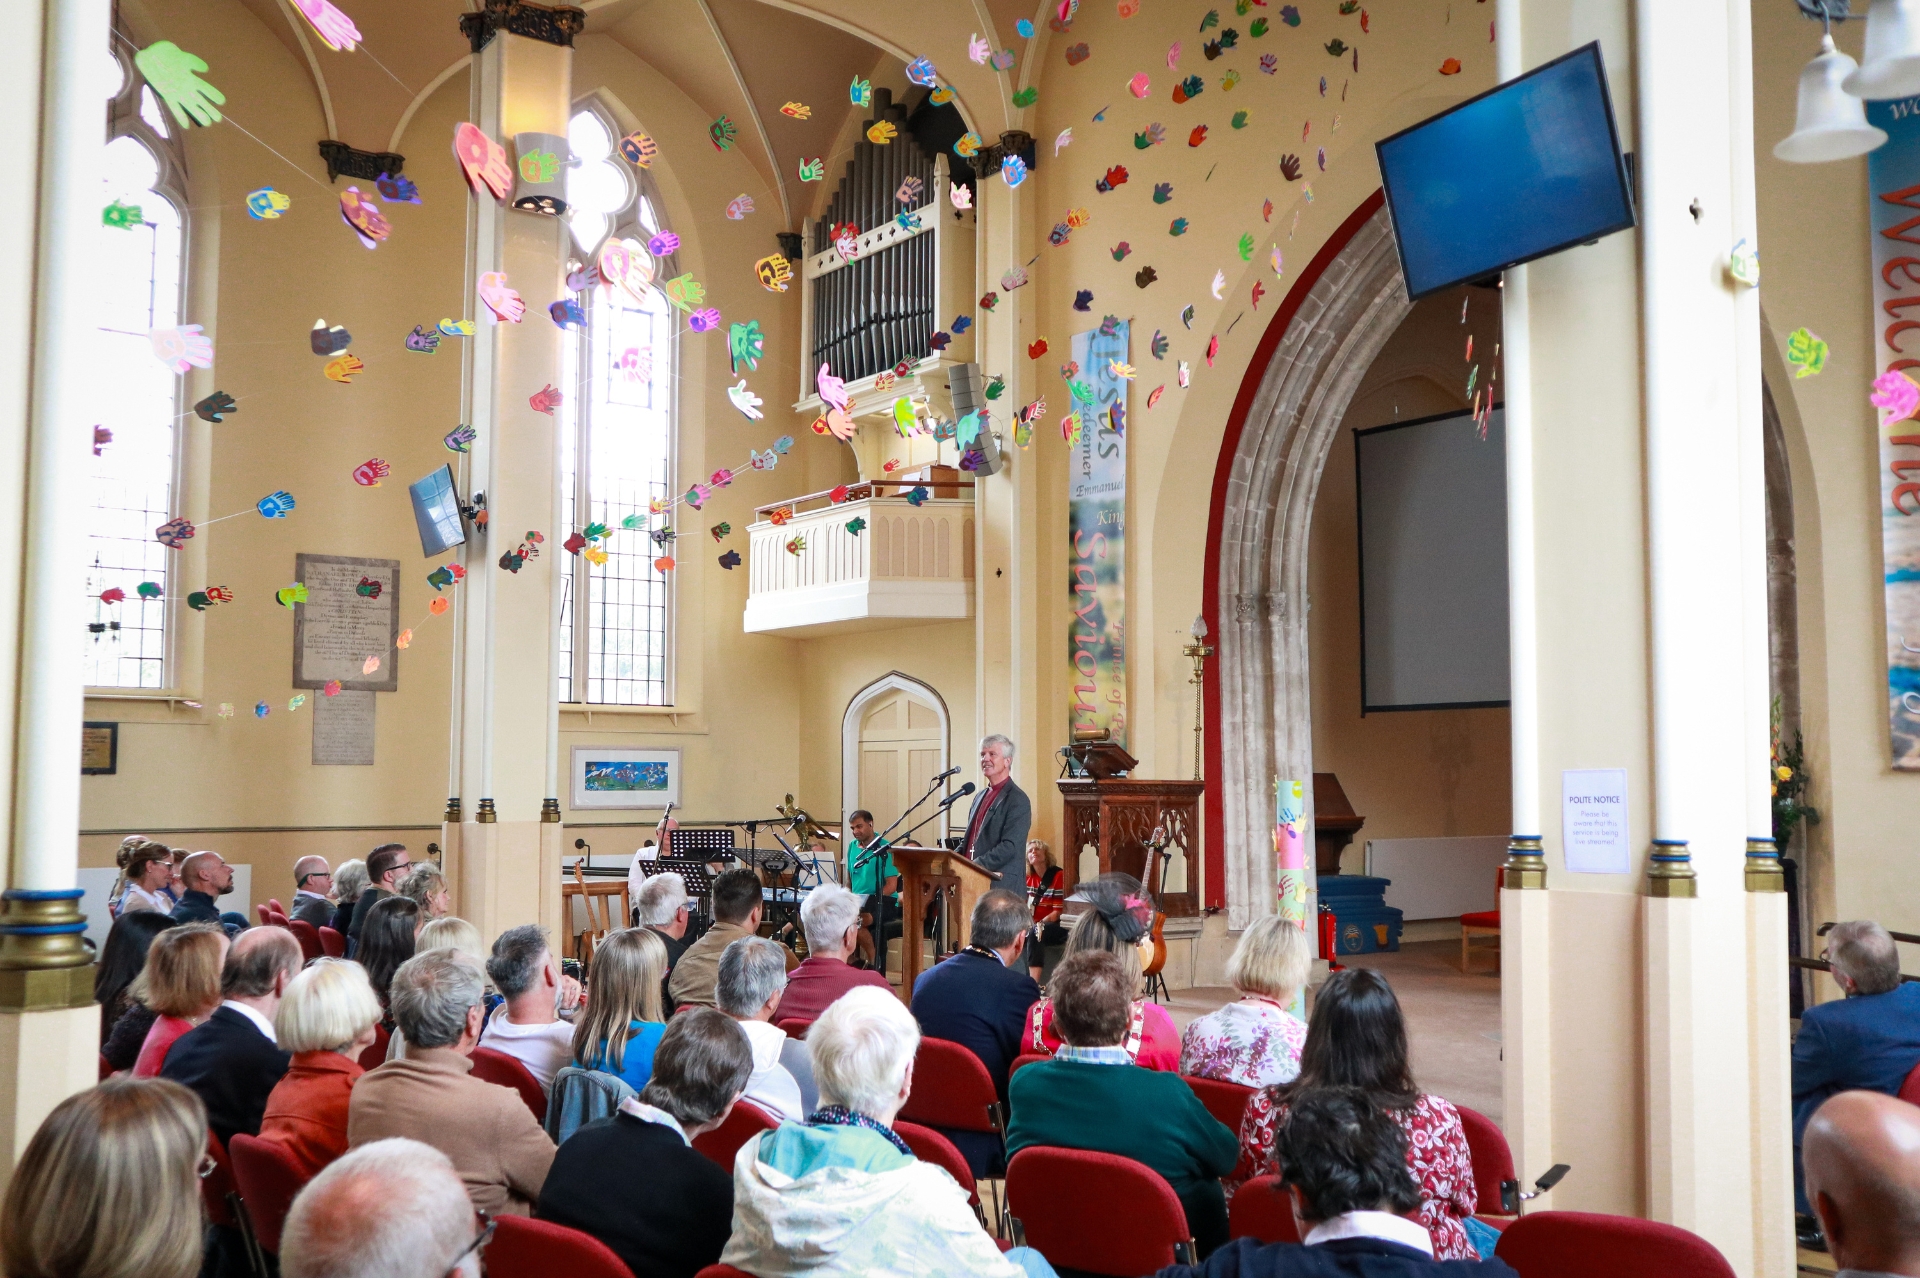 Interior shot of St Peter's Church in Cherstey with congregration, decorated with colourful crafted flowers